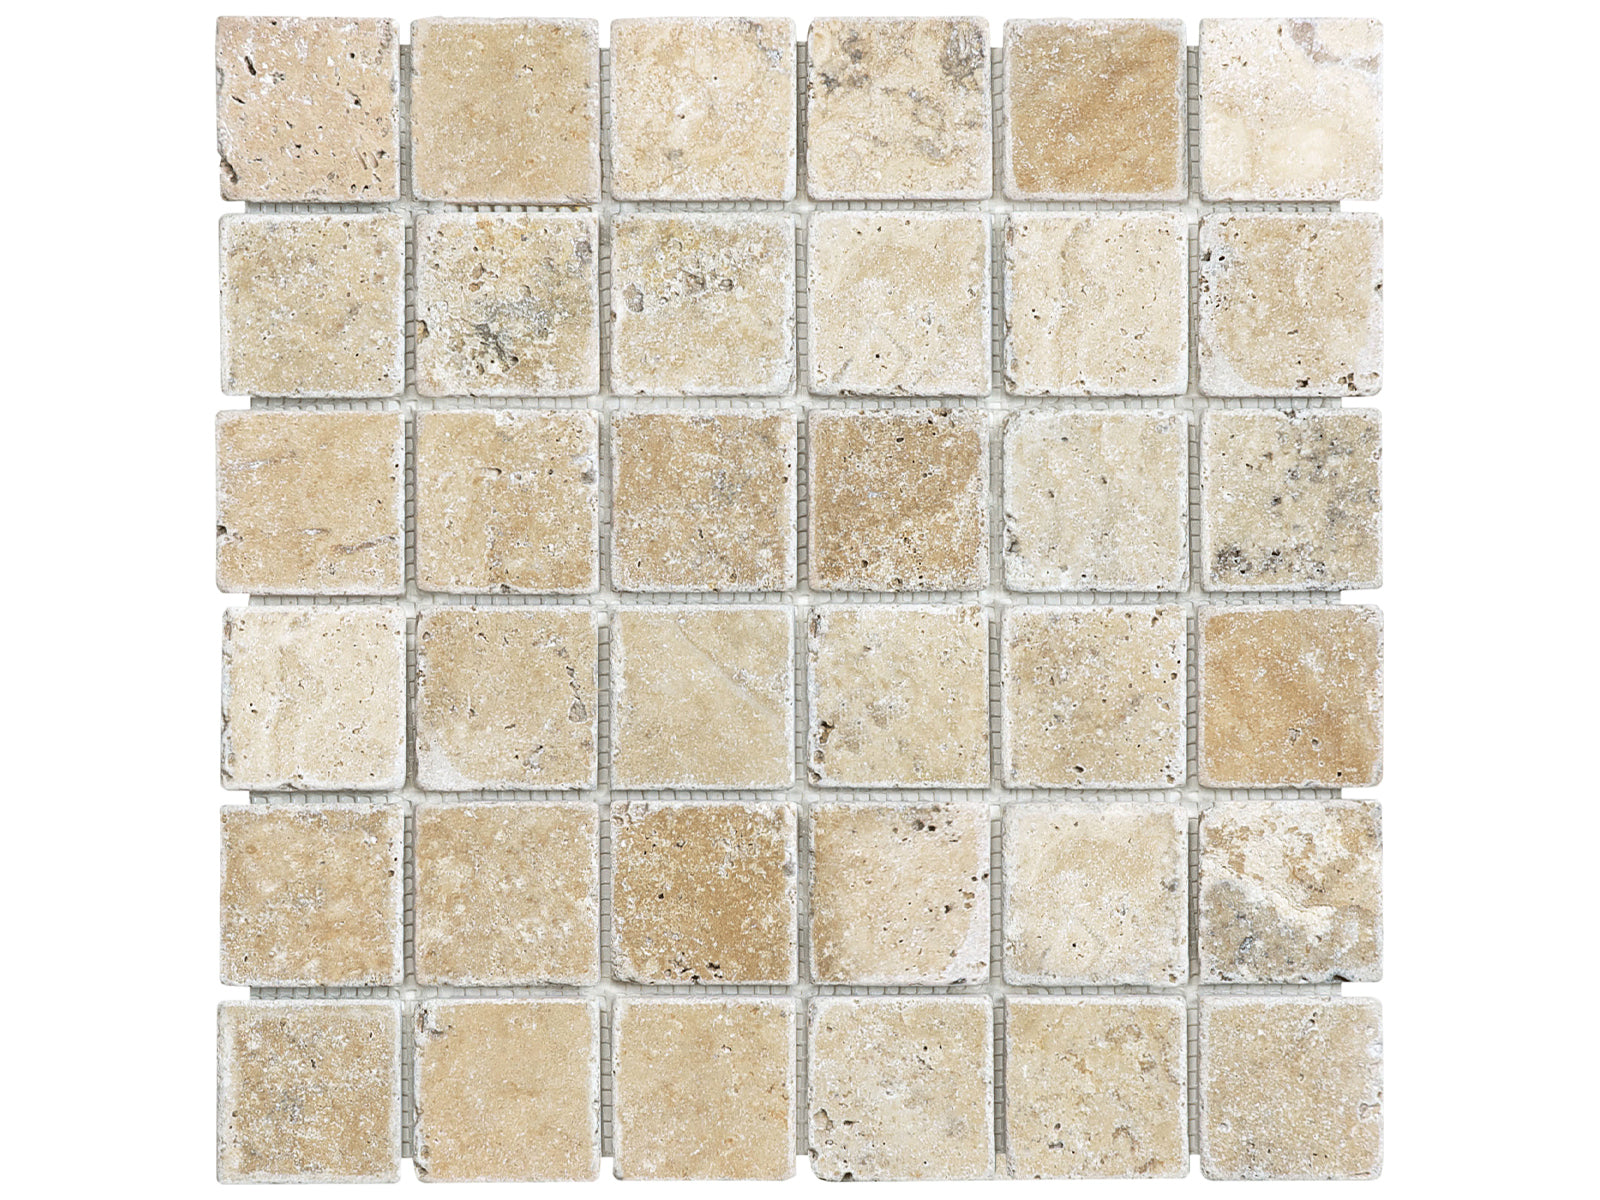 2 X 2 In Picasso Tumbled Travertine Mosaic